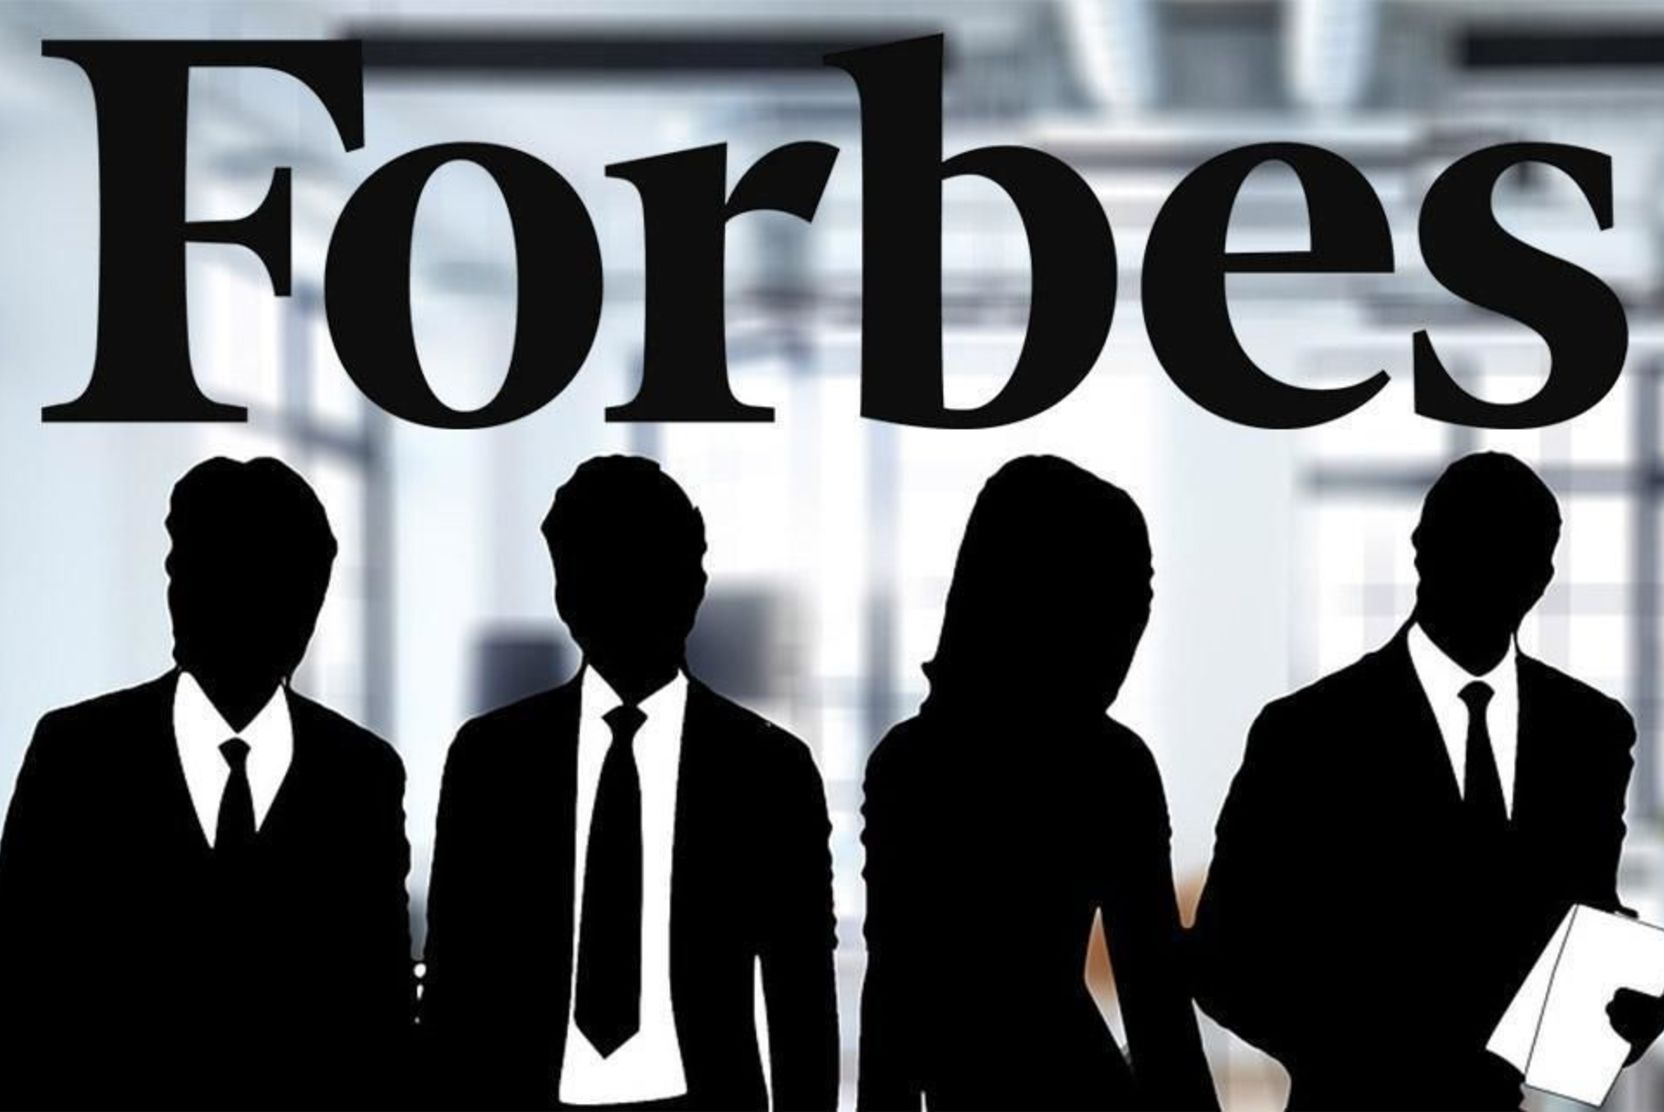  forbes       255 